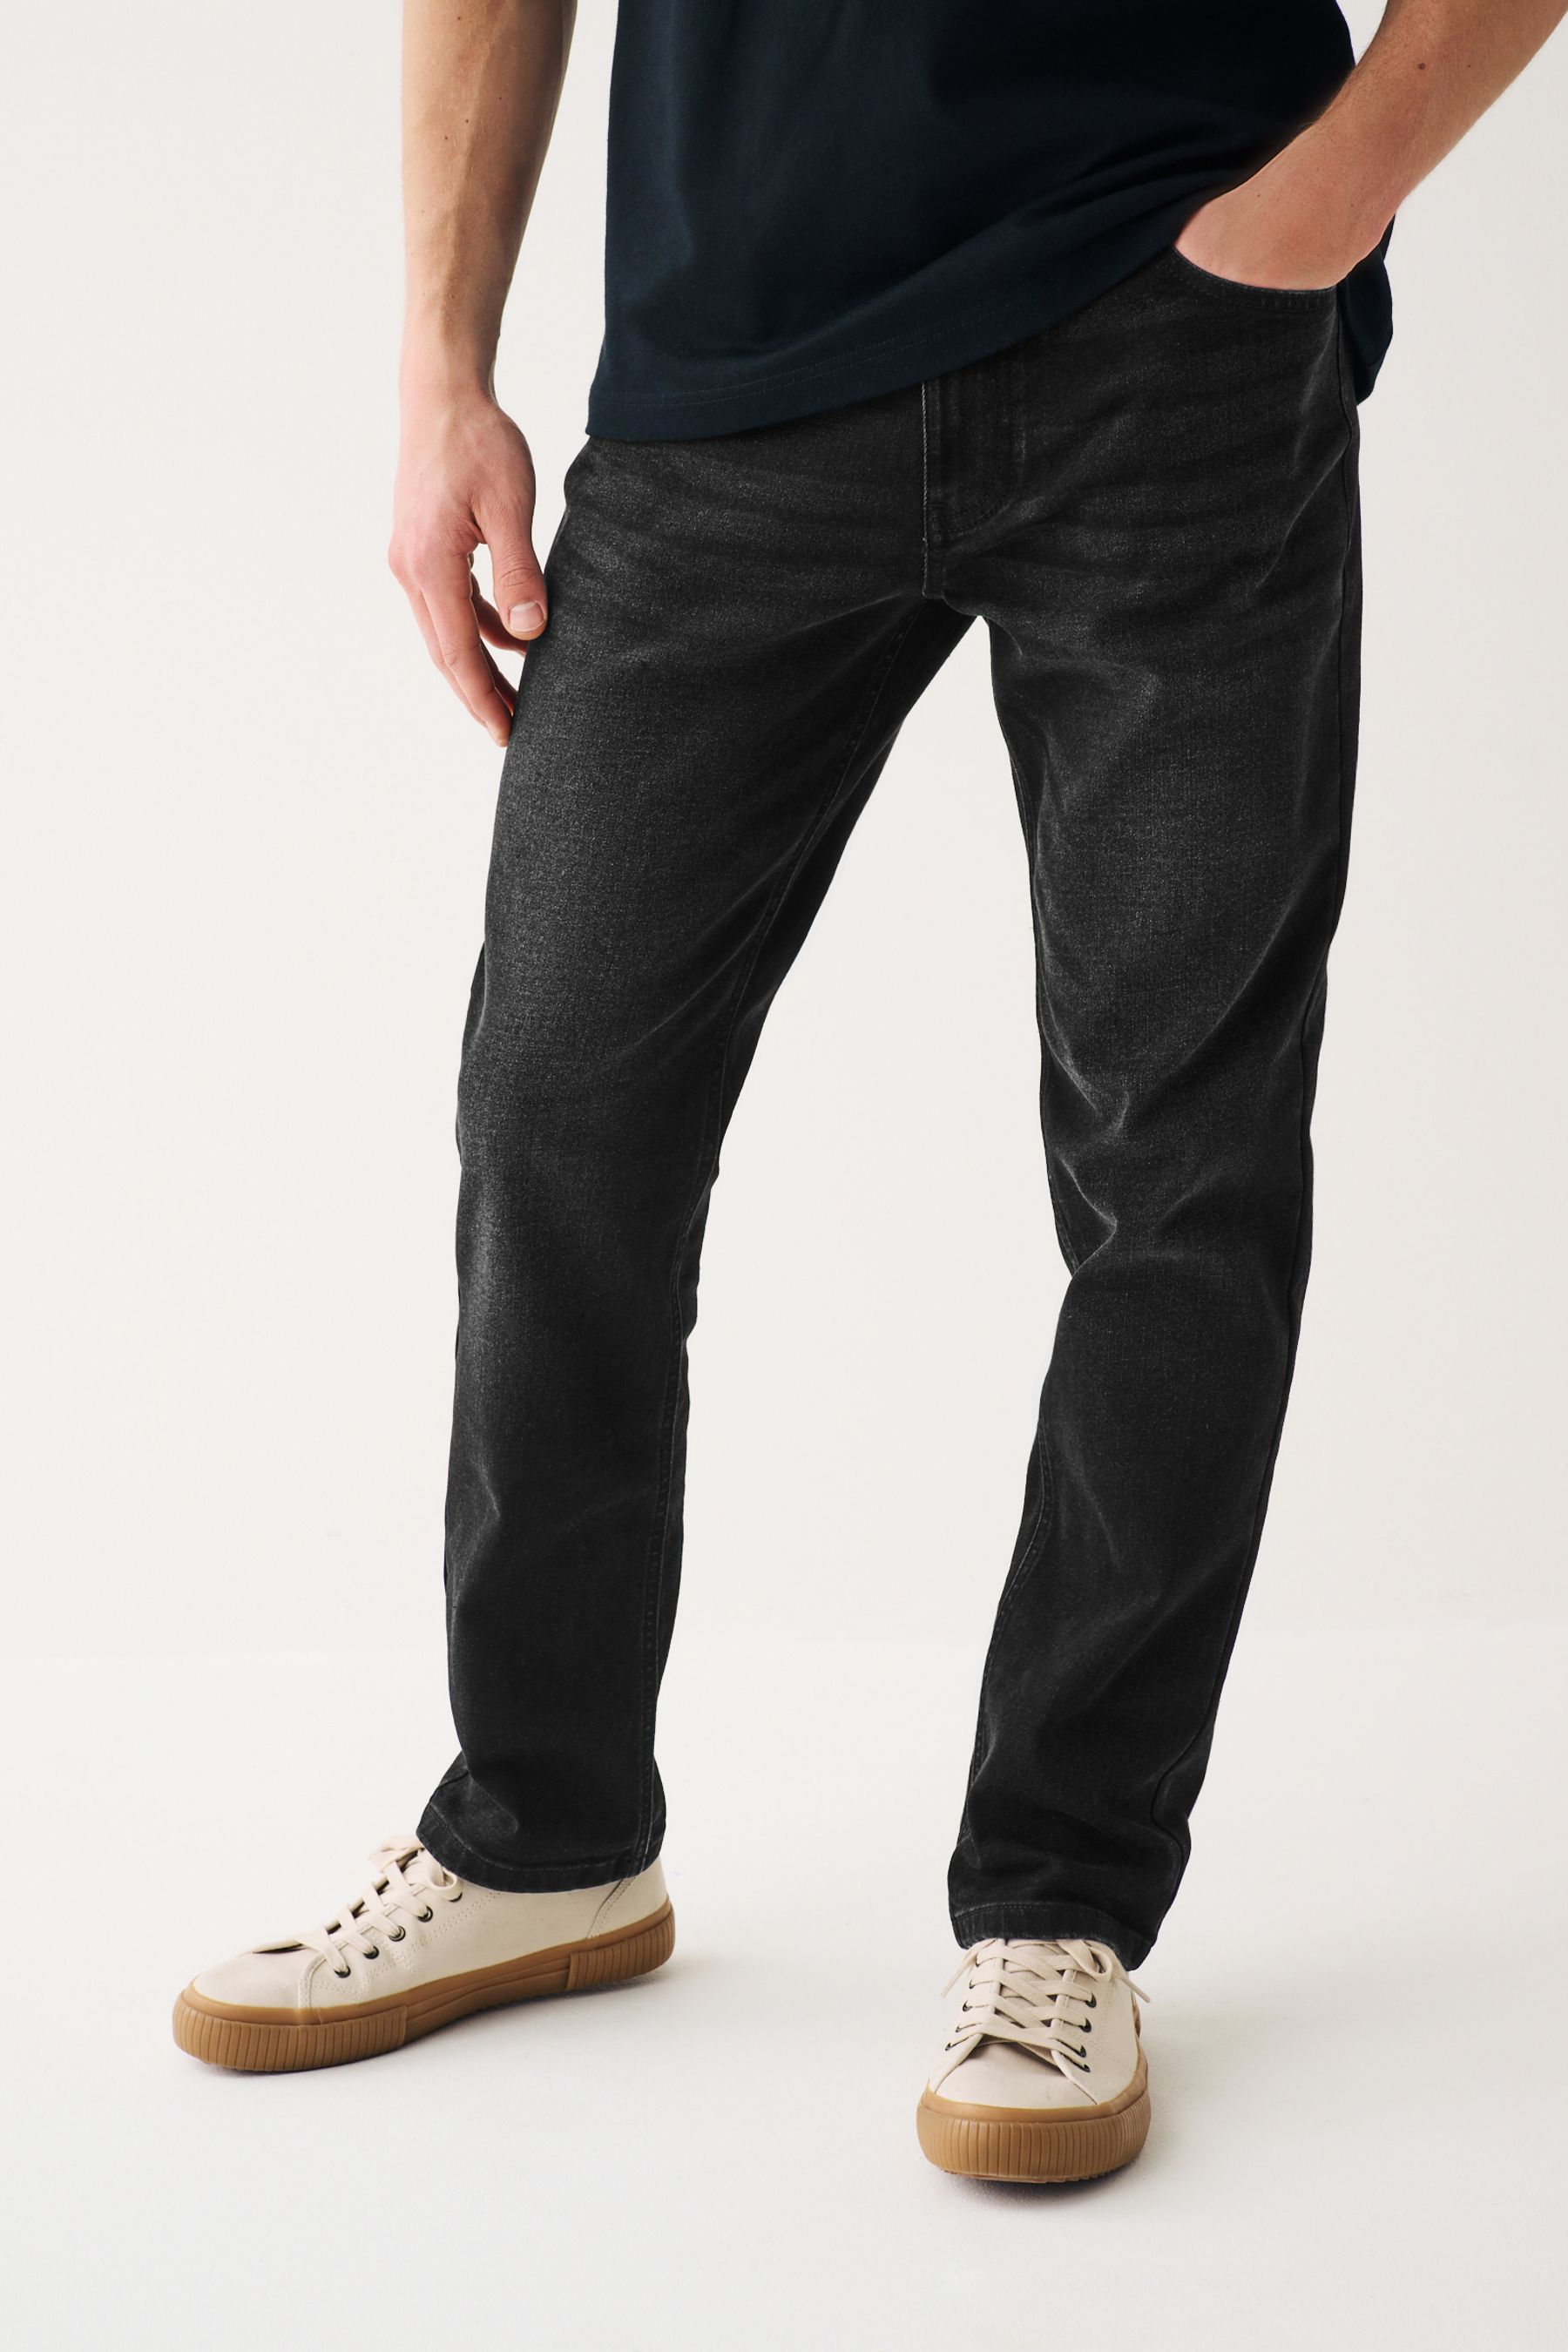 Buy Black Slim Essential Stretch Jeans from the Next UK online shop